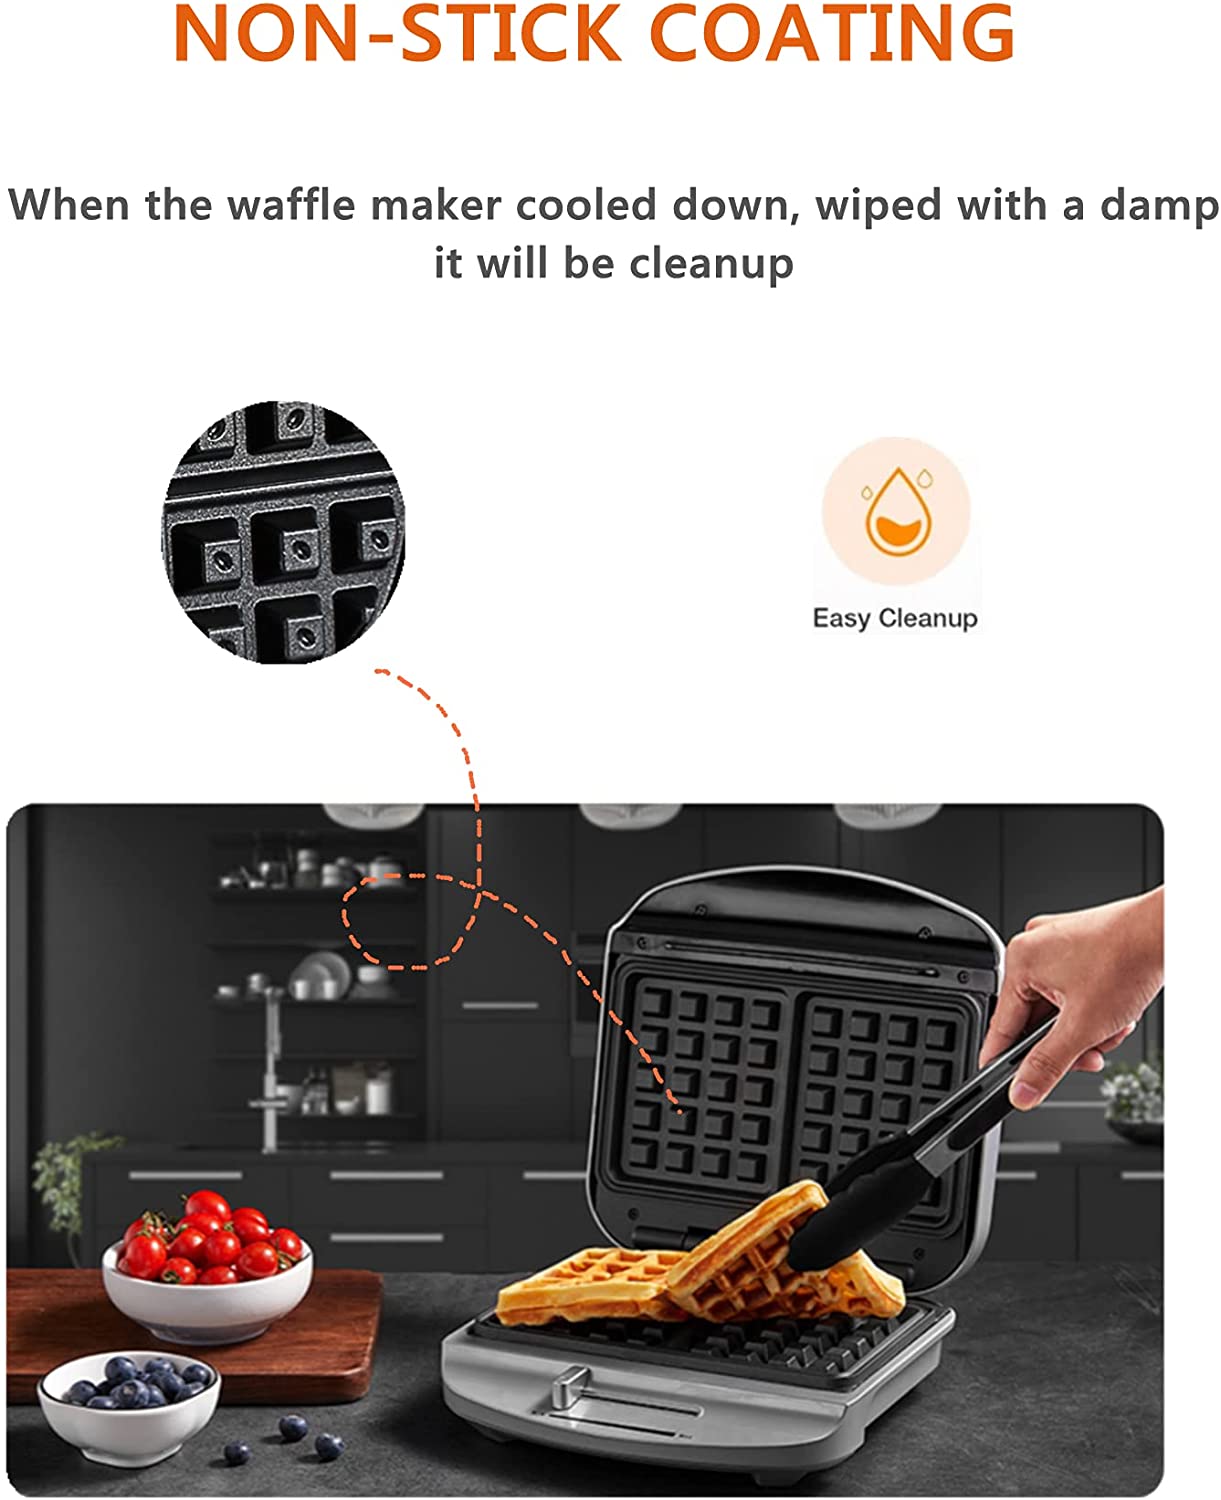 Belgian Waffle Maker, Non Stick Waffle Iron Machine with Adjustable Temperature Control, Indicator Lights, Compact Design, 1000W, 2 Slices, Silver